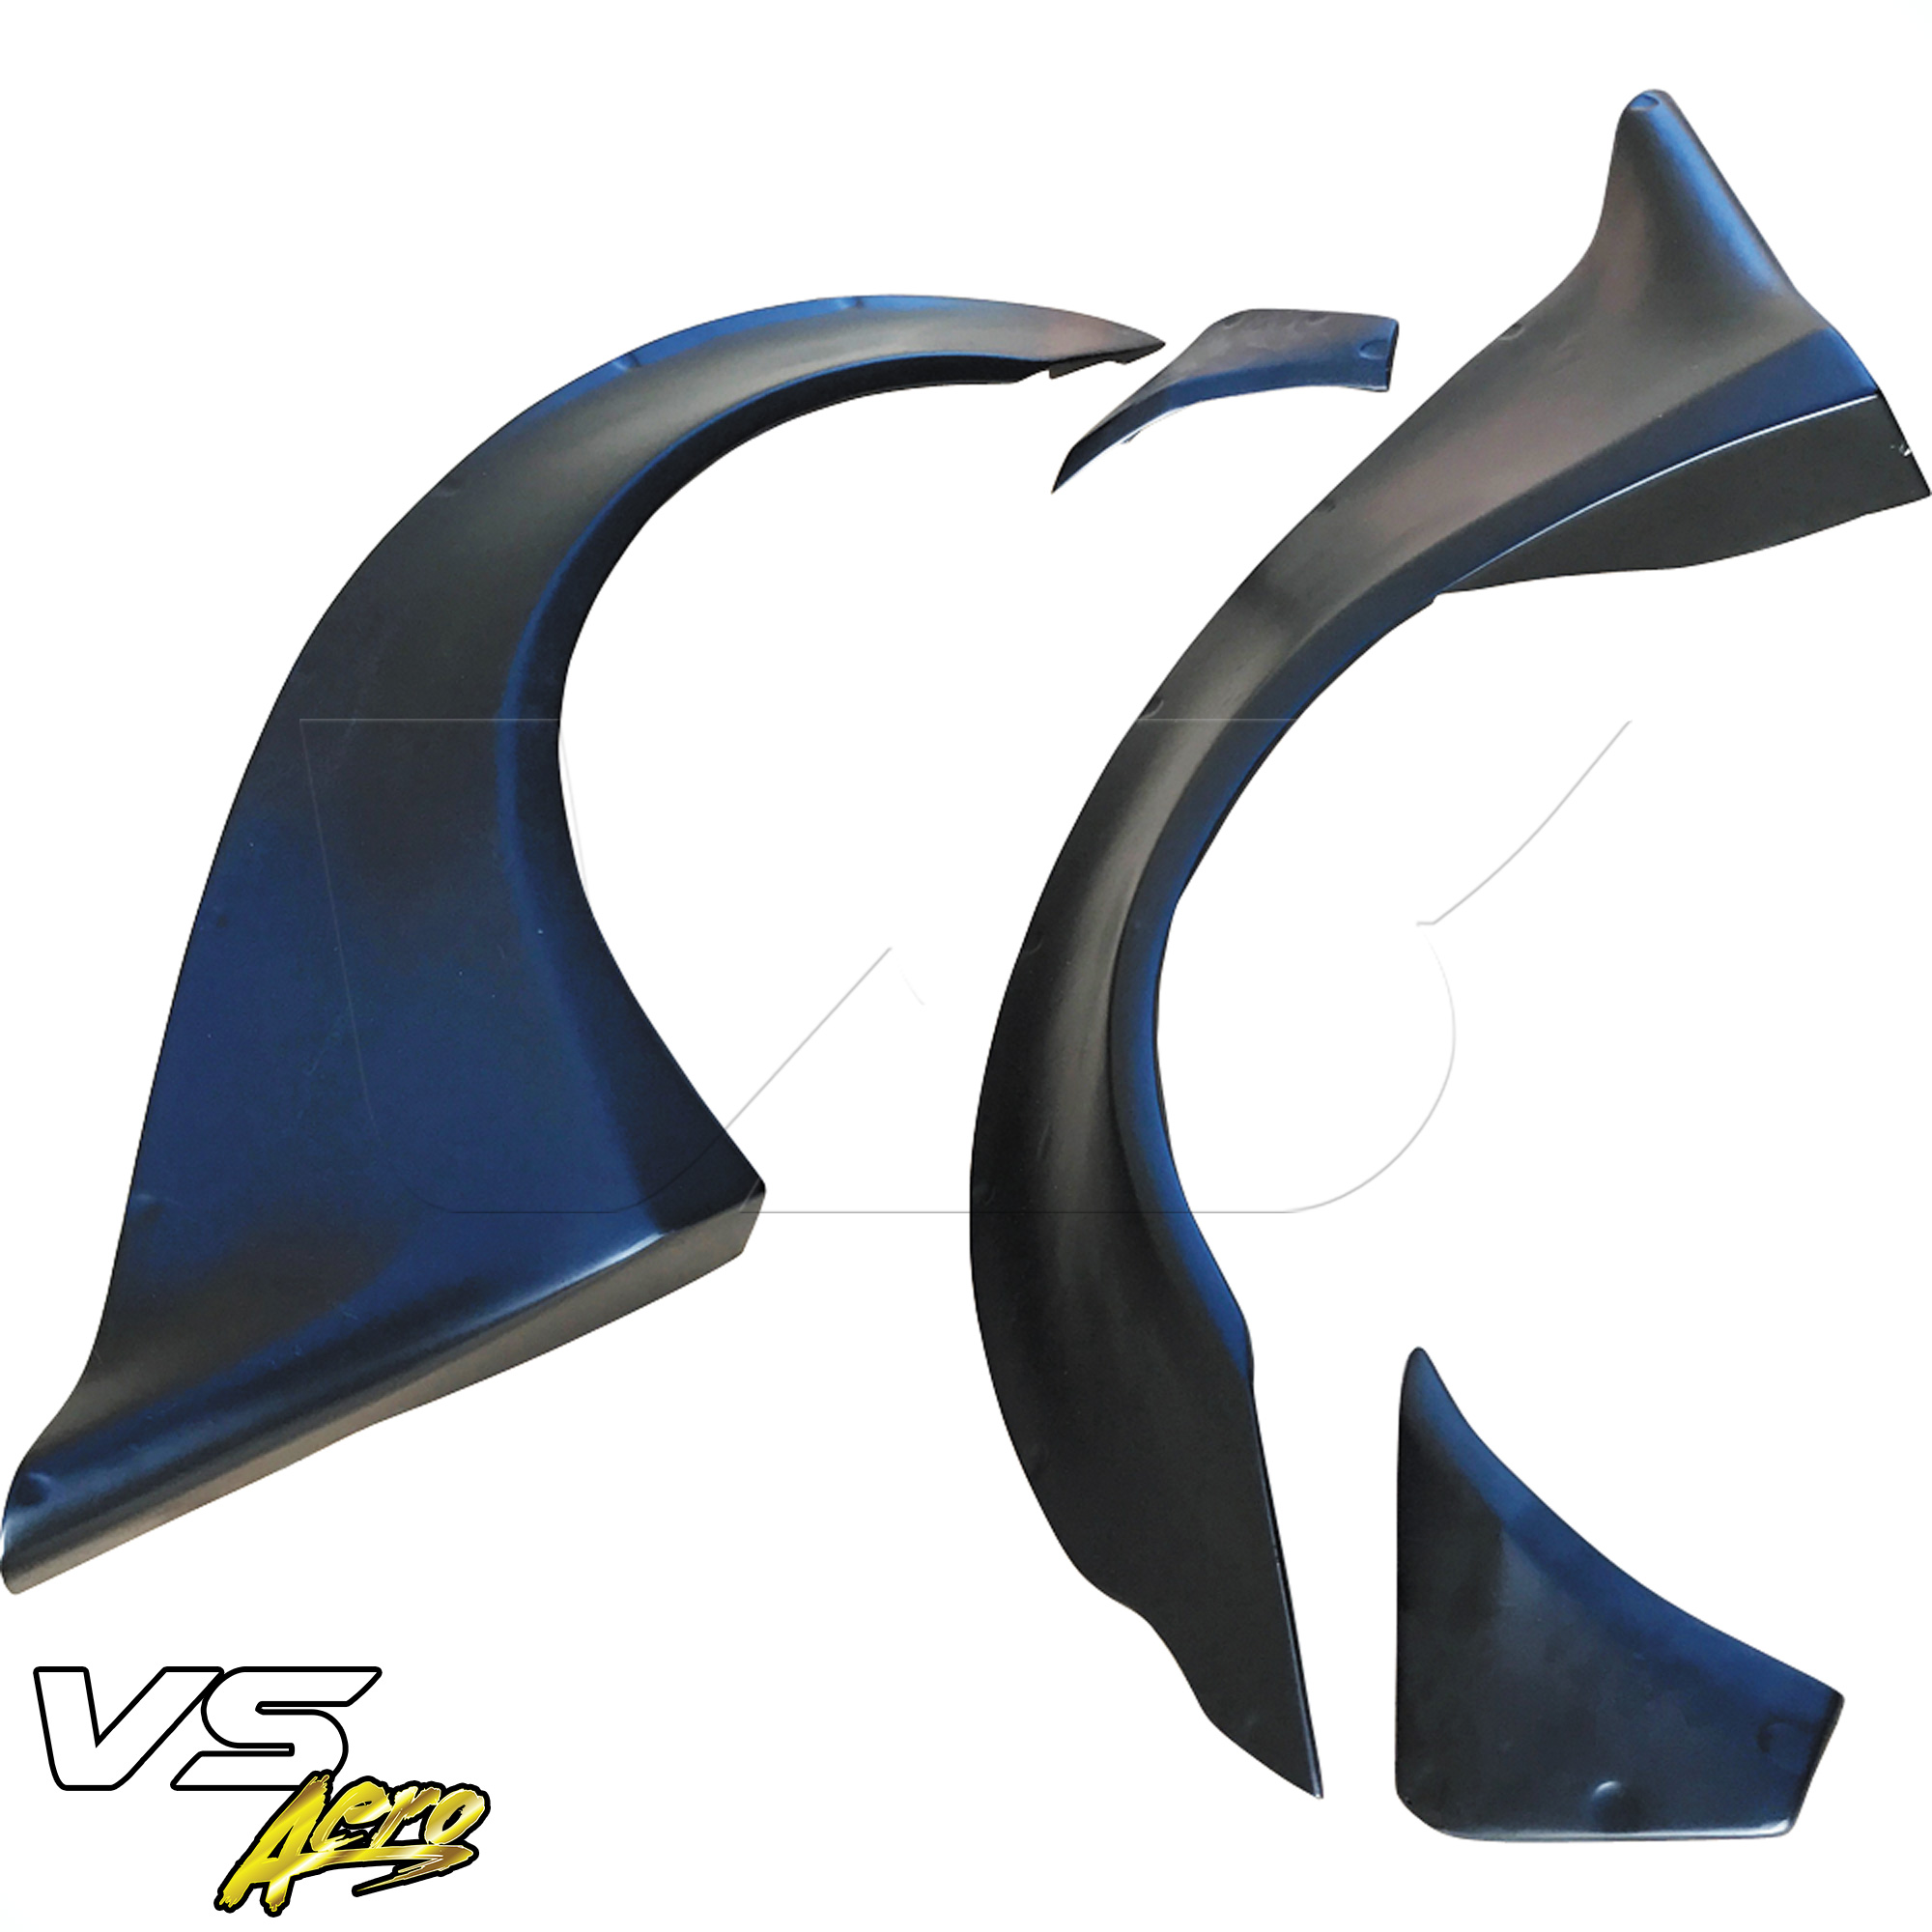 VSaero FRP LBPE Wide Body Fender Flares (rear) 4pc > Infiniti G37 Coupe 2008-2015 > 2dr Coupe - Image 6